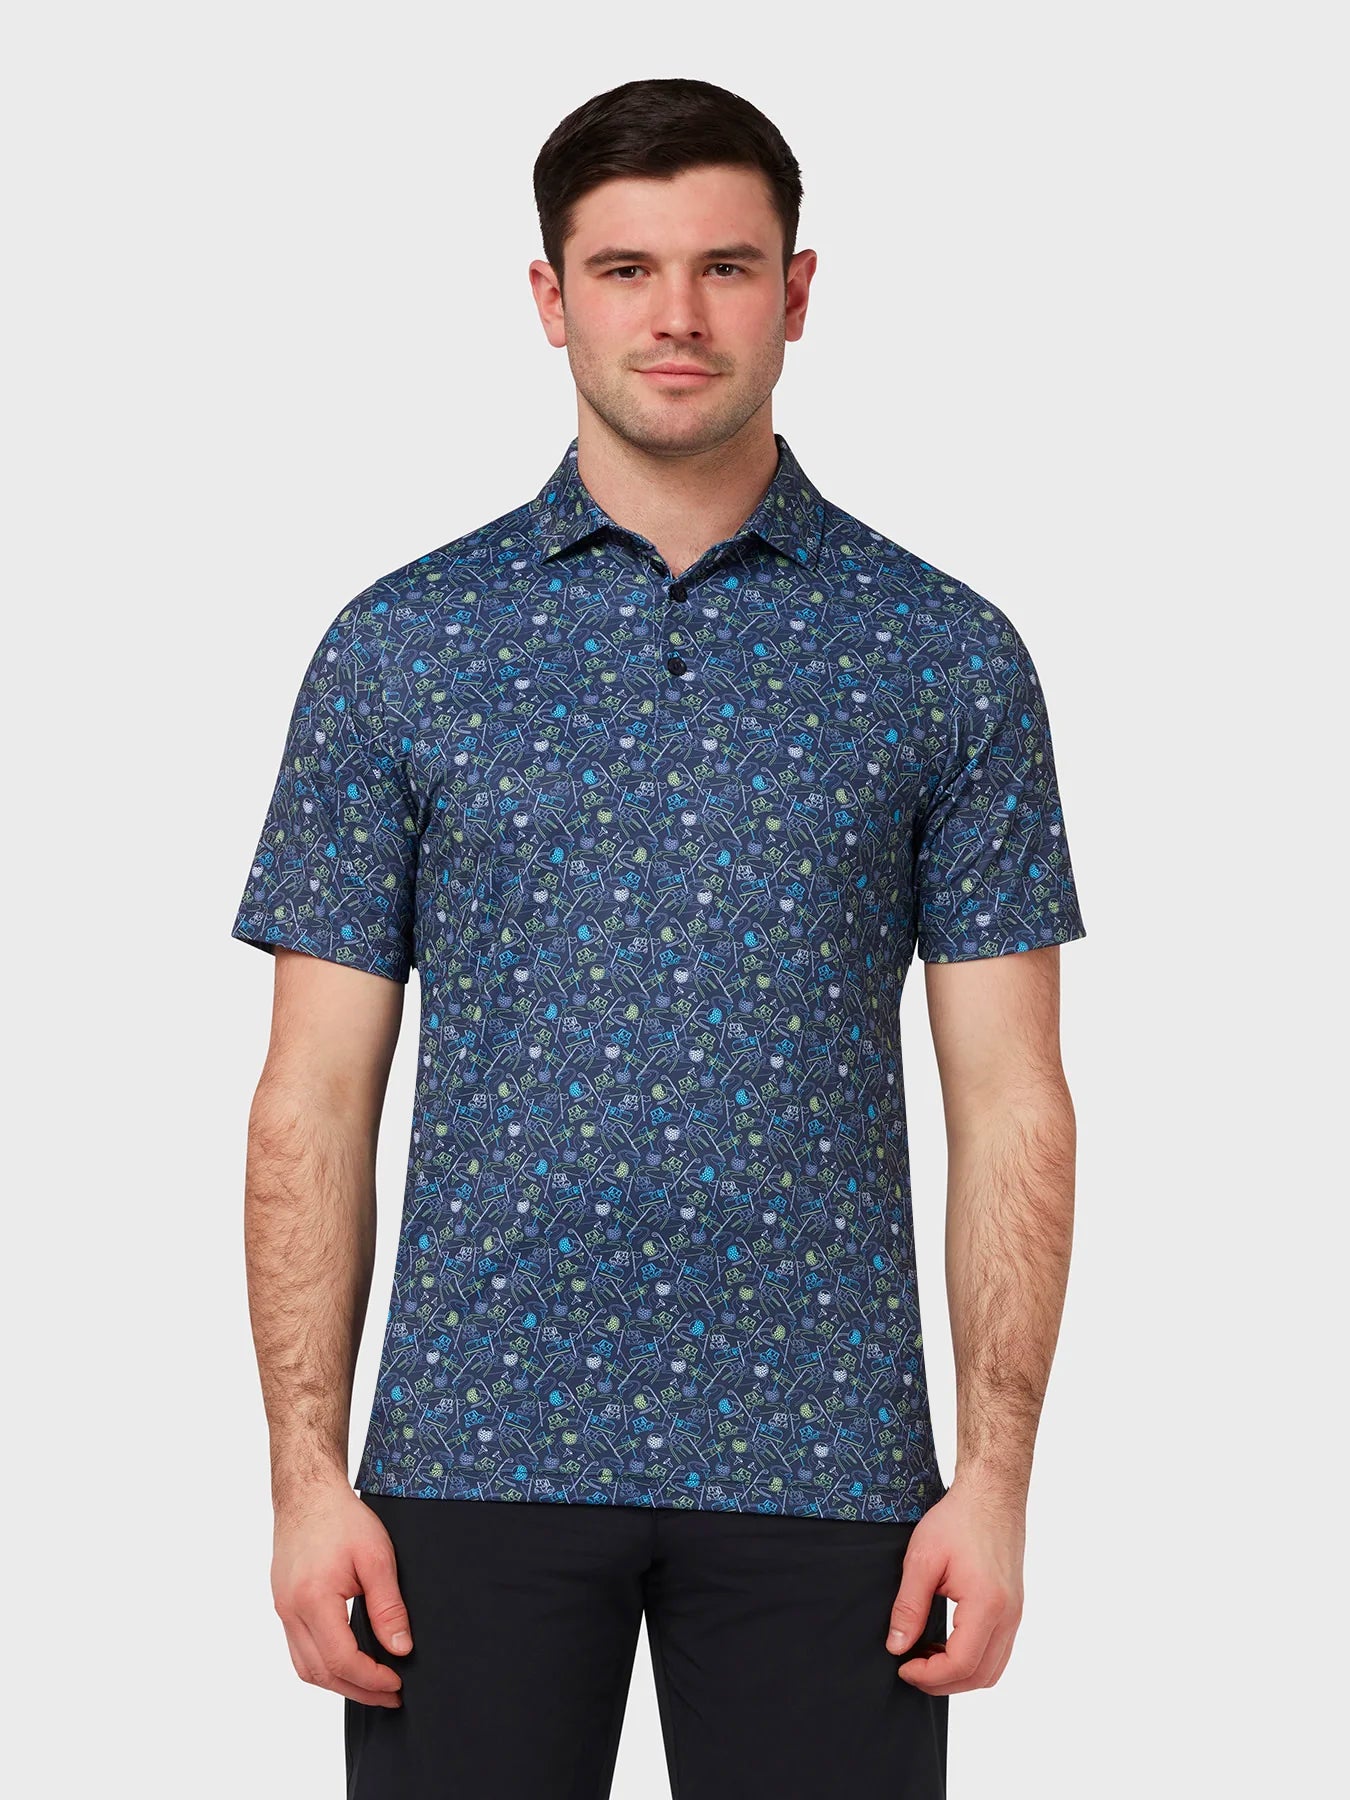 View All Over Golf Novelty Print Polo In Peacoat information